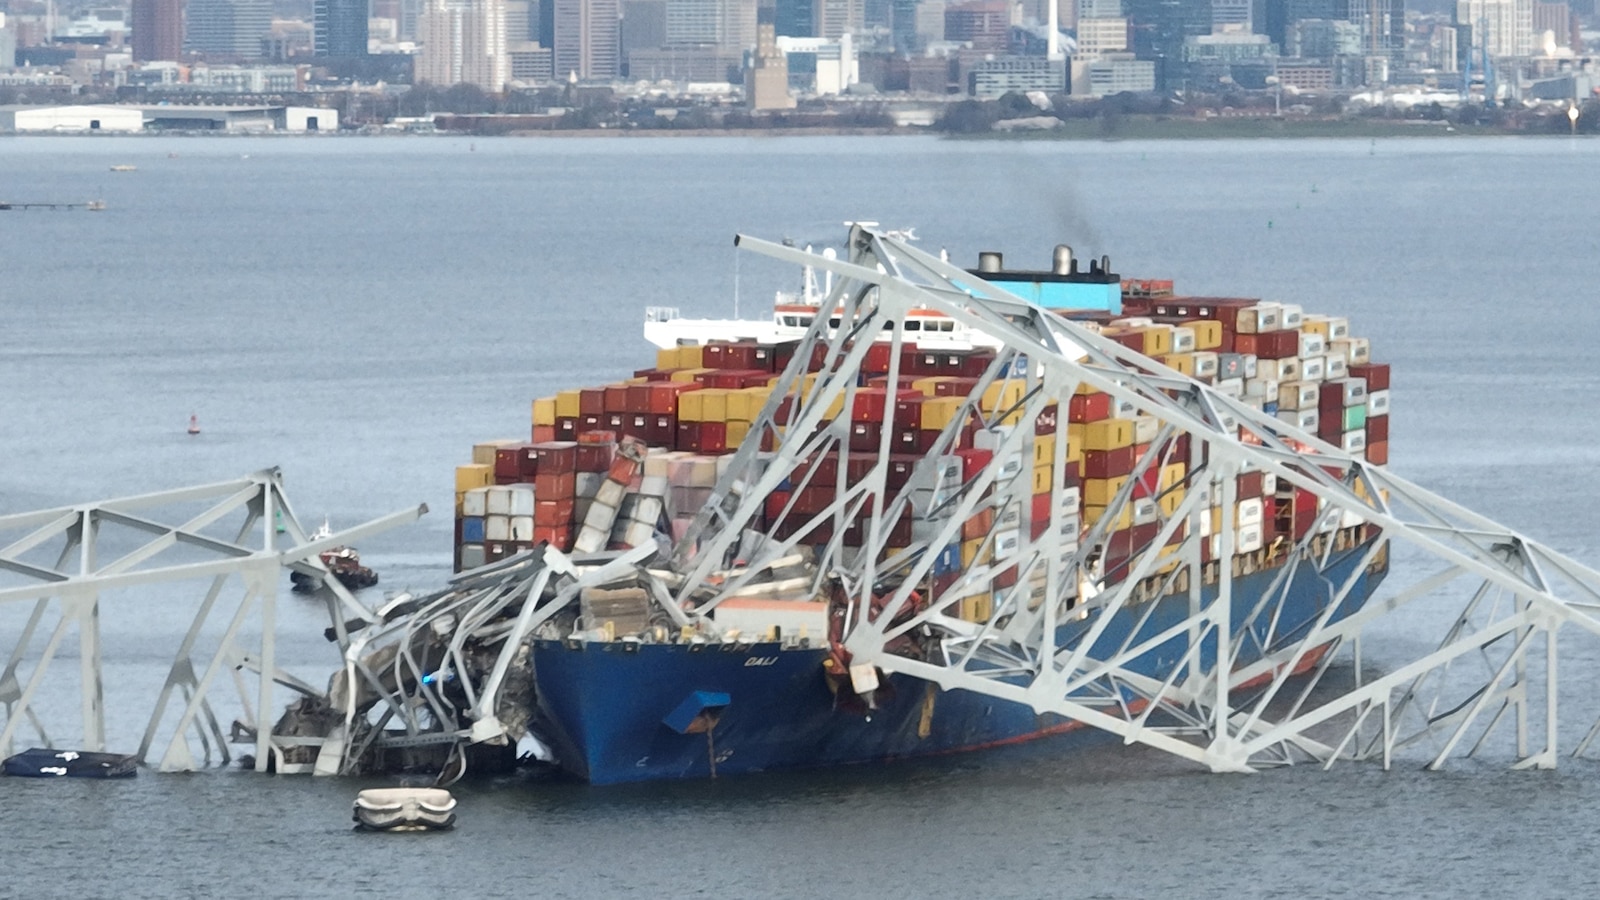 5th victim’s body recovered in Baltimore Key Bridge collapse [Video]